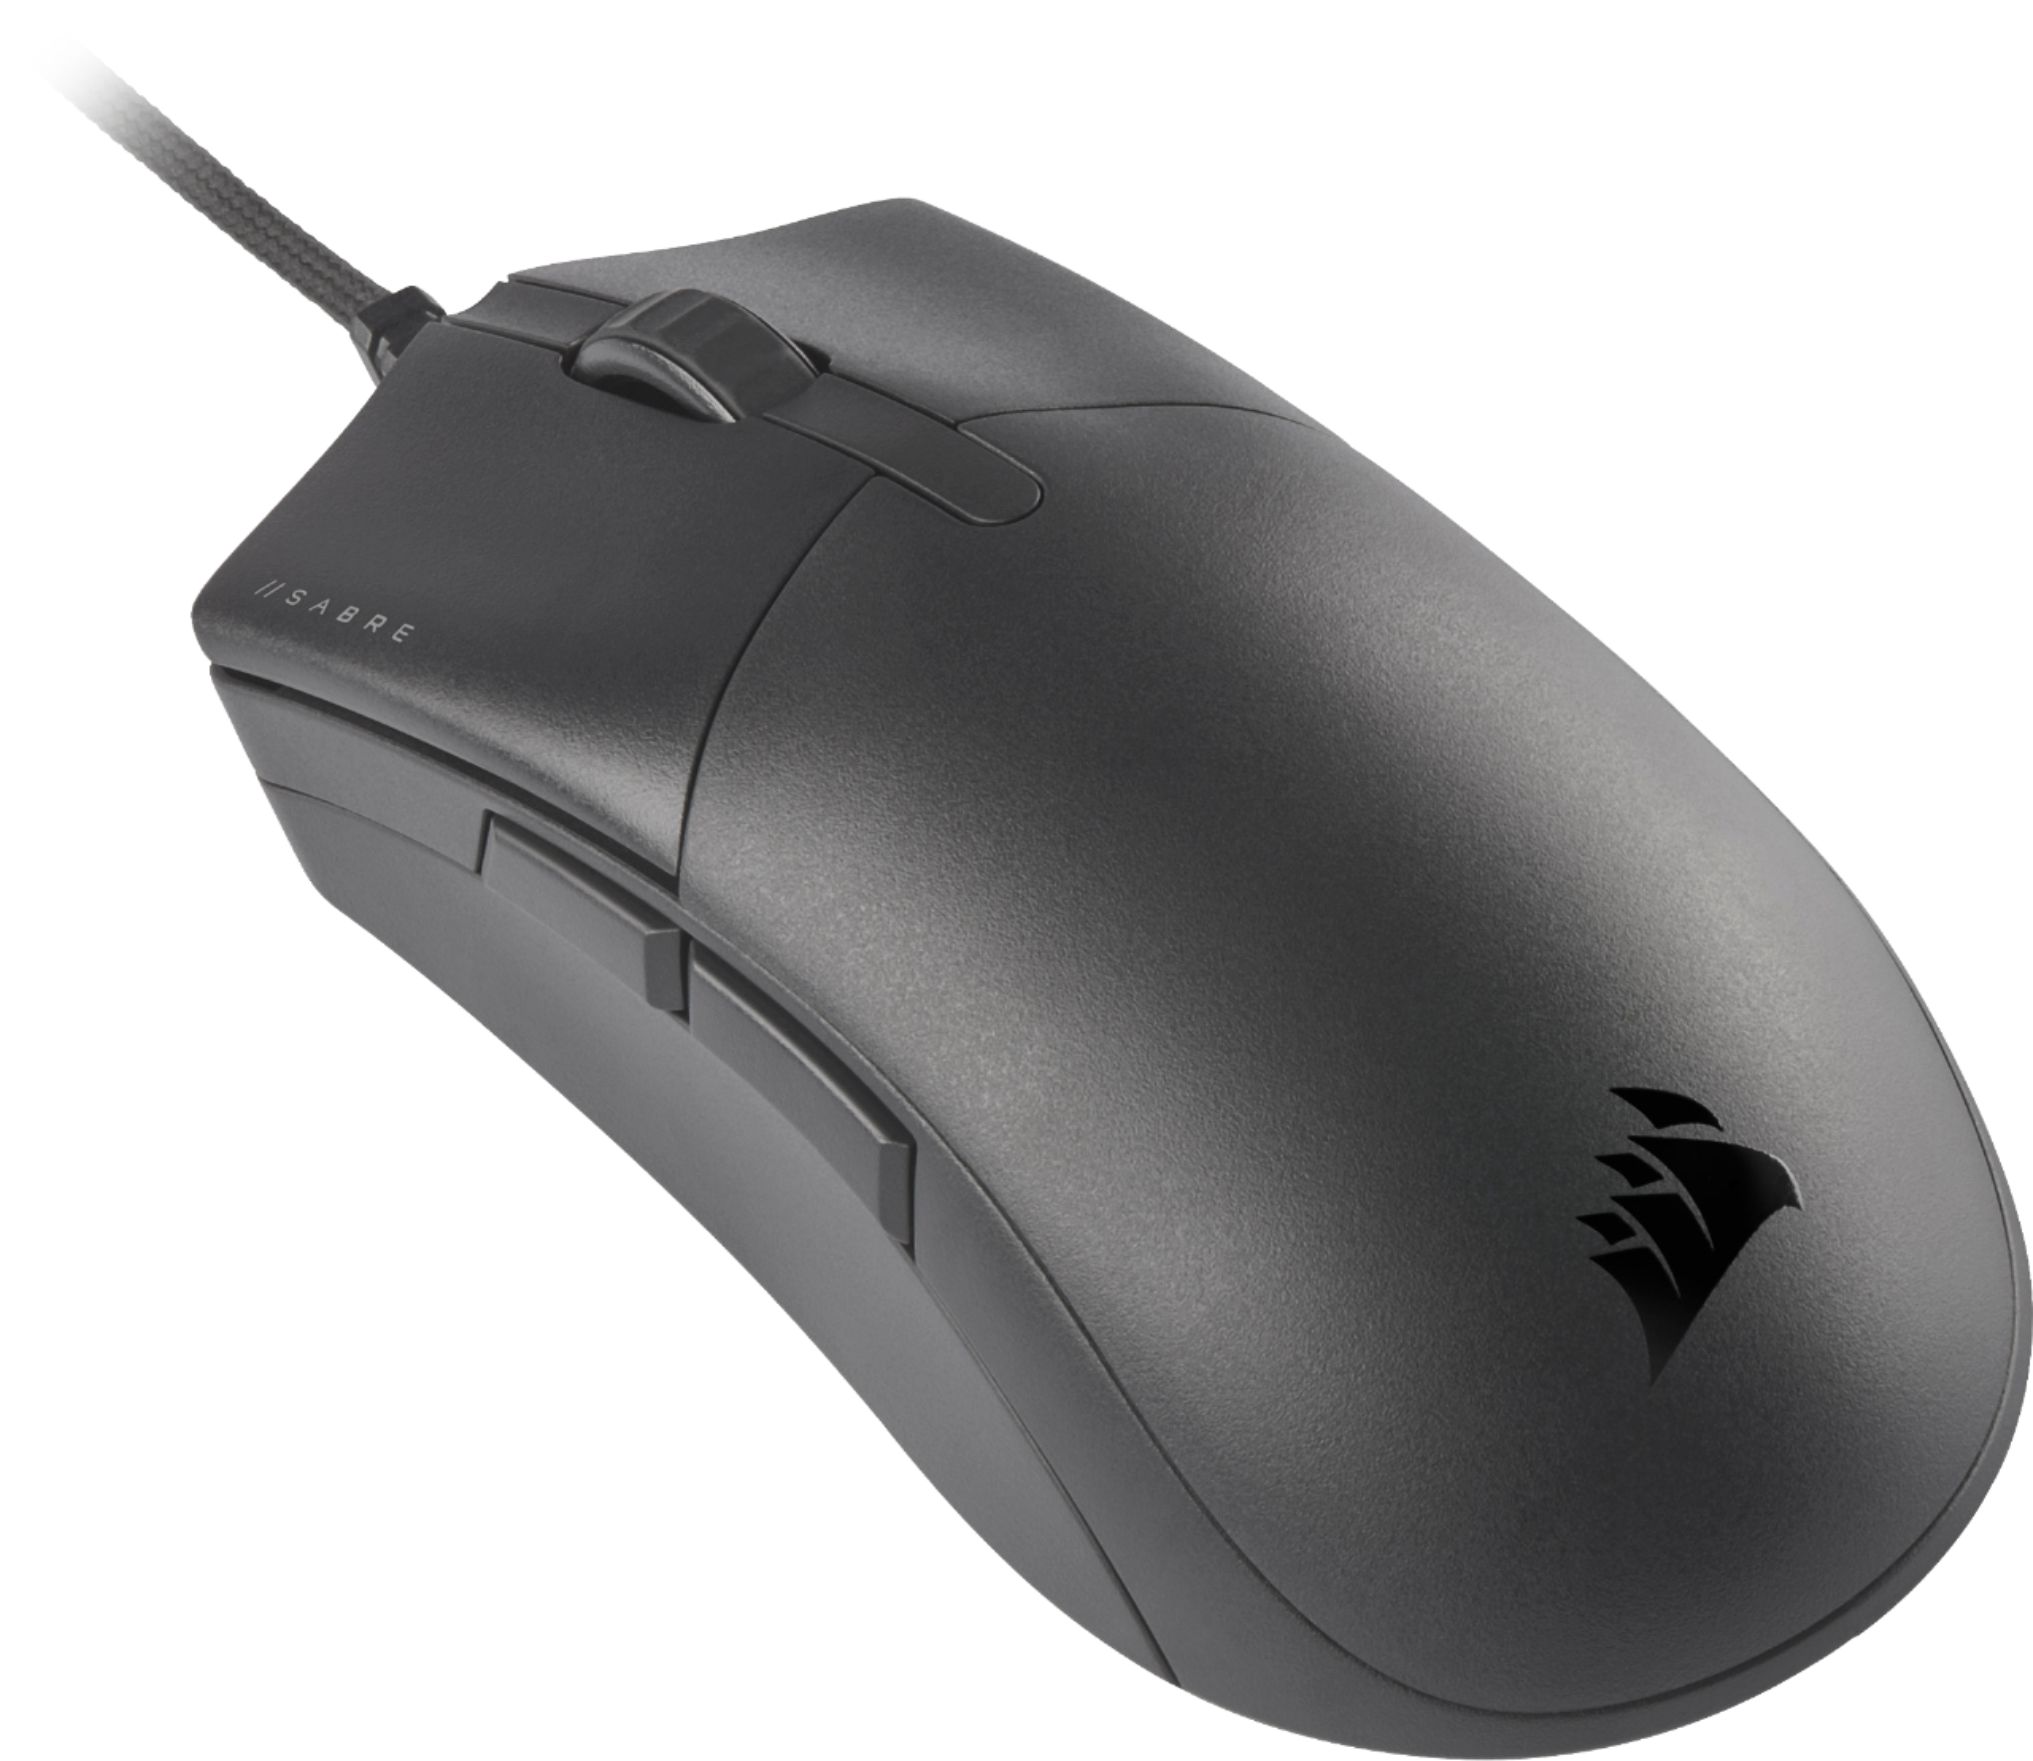 Angle View: CORSAIR - CHAMPION SERIES SABRE PRO  Lightweight Wired Optical Gaming Mouse with 69g Ultra-lightweight design - Black